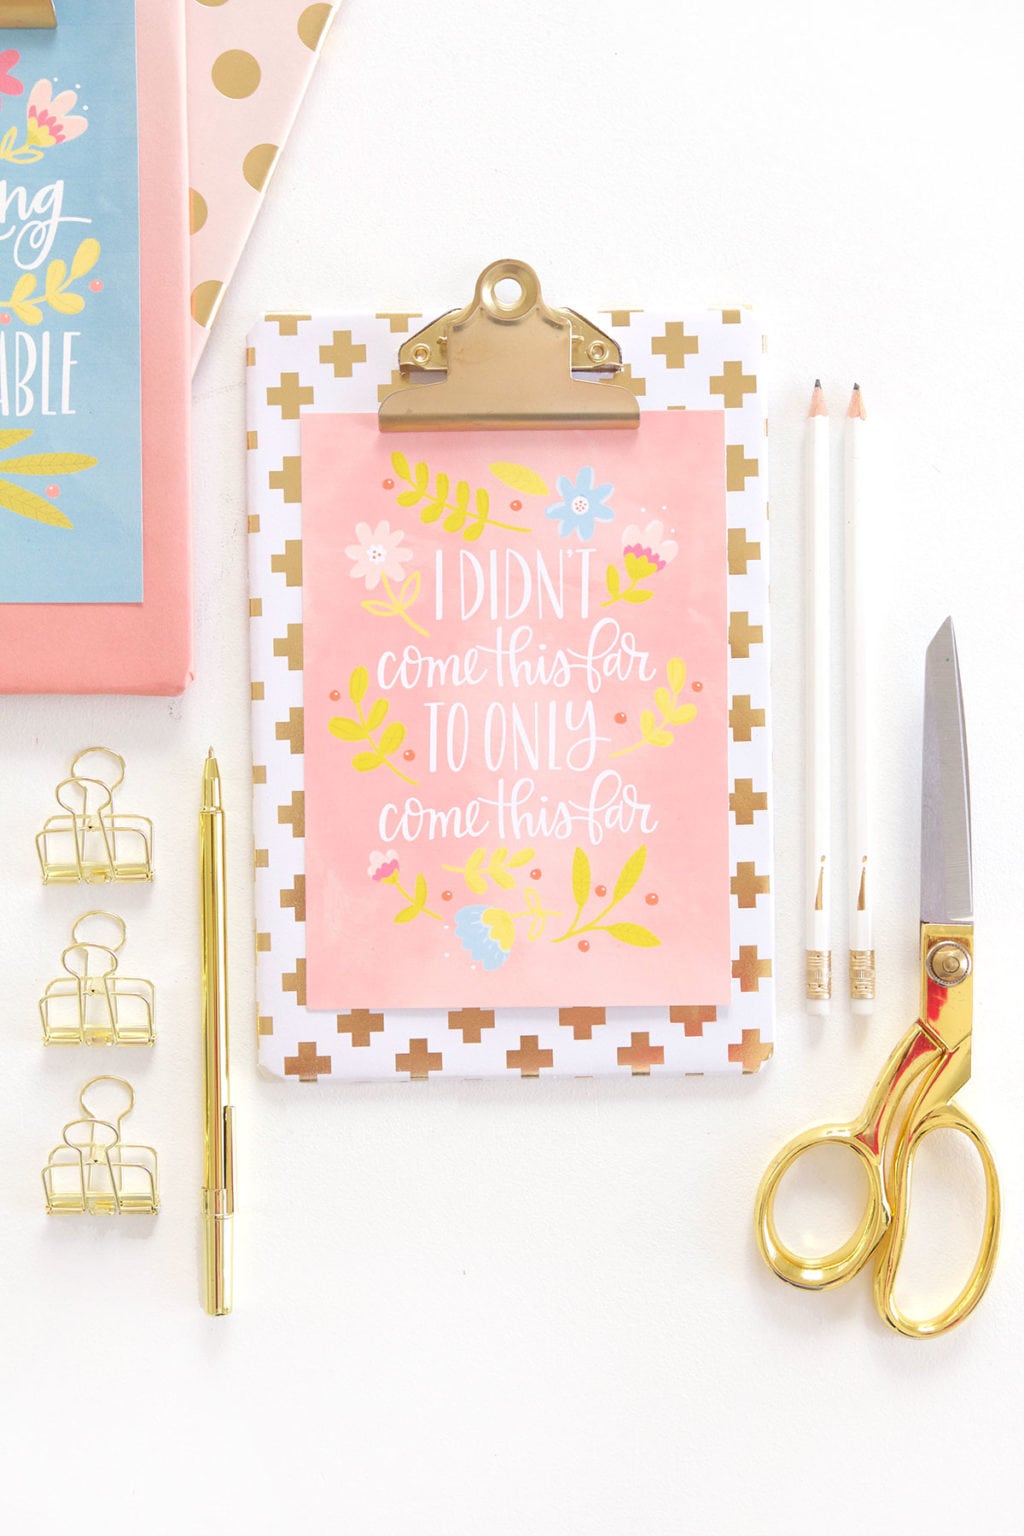 Learn how to cover a clipboard + inspirational printables! All you need is your printer and a few basic craft supplies to make this simple project.